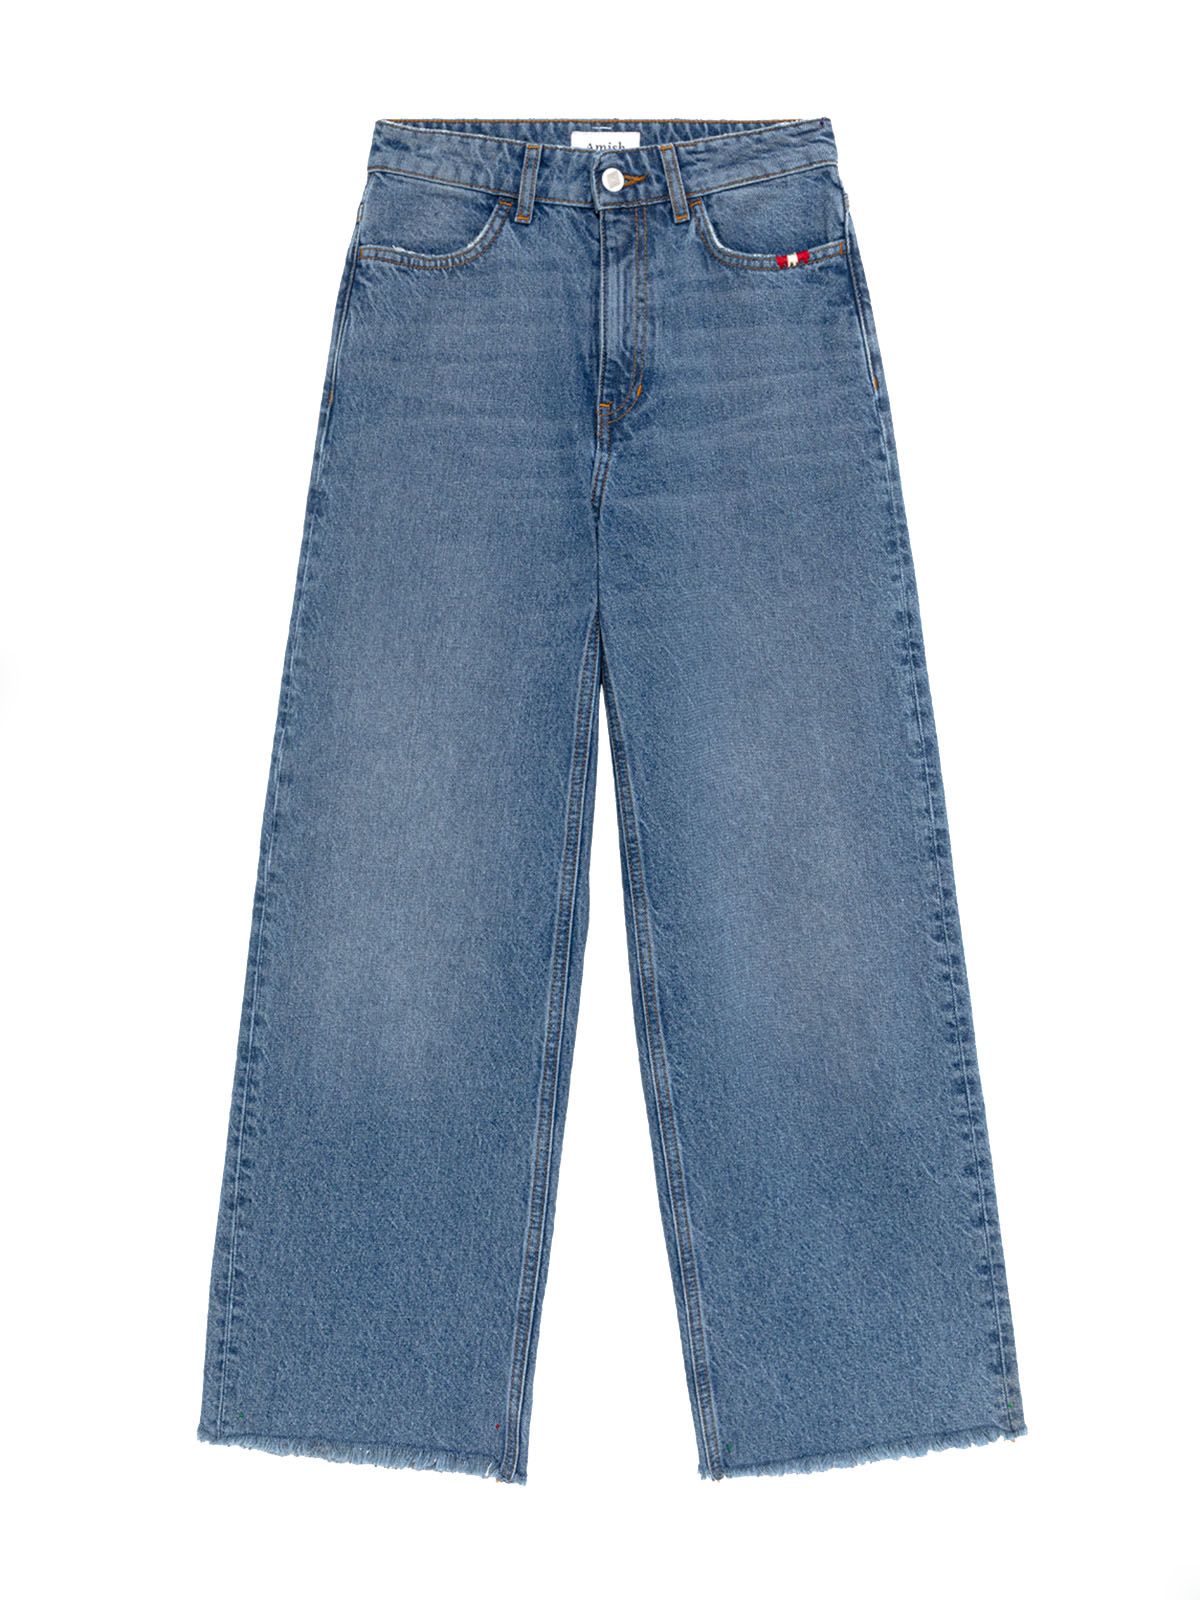 Jeans Donna Amish - Jeans Linda Used Cut - Blu